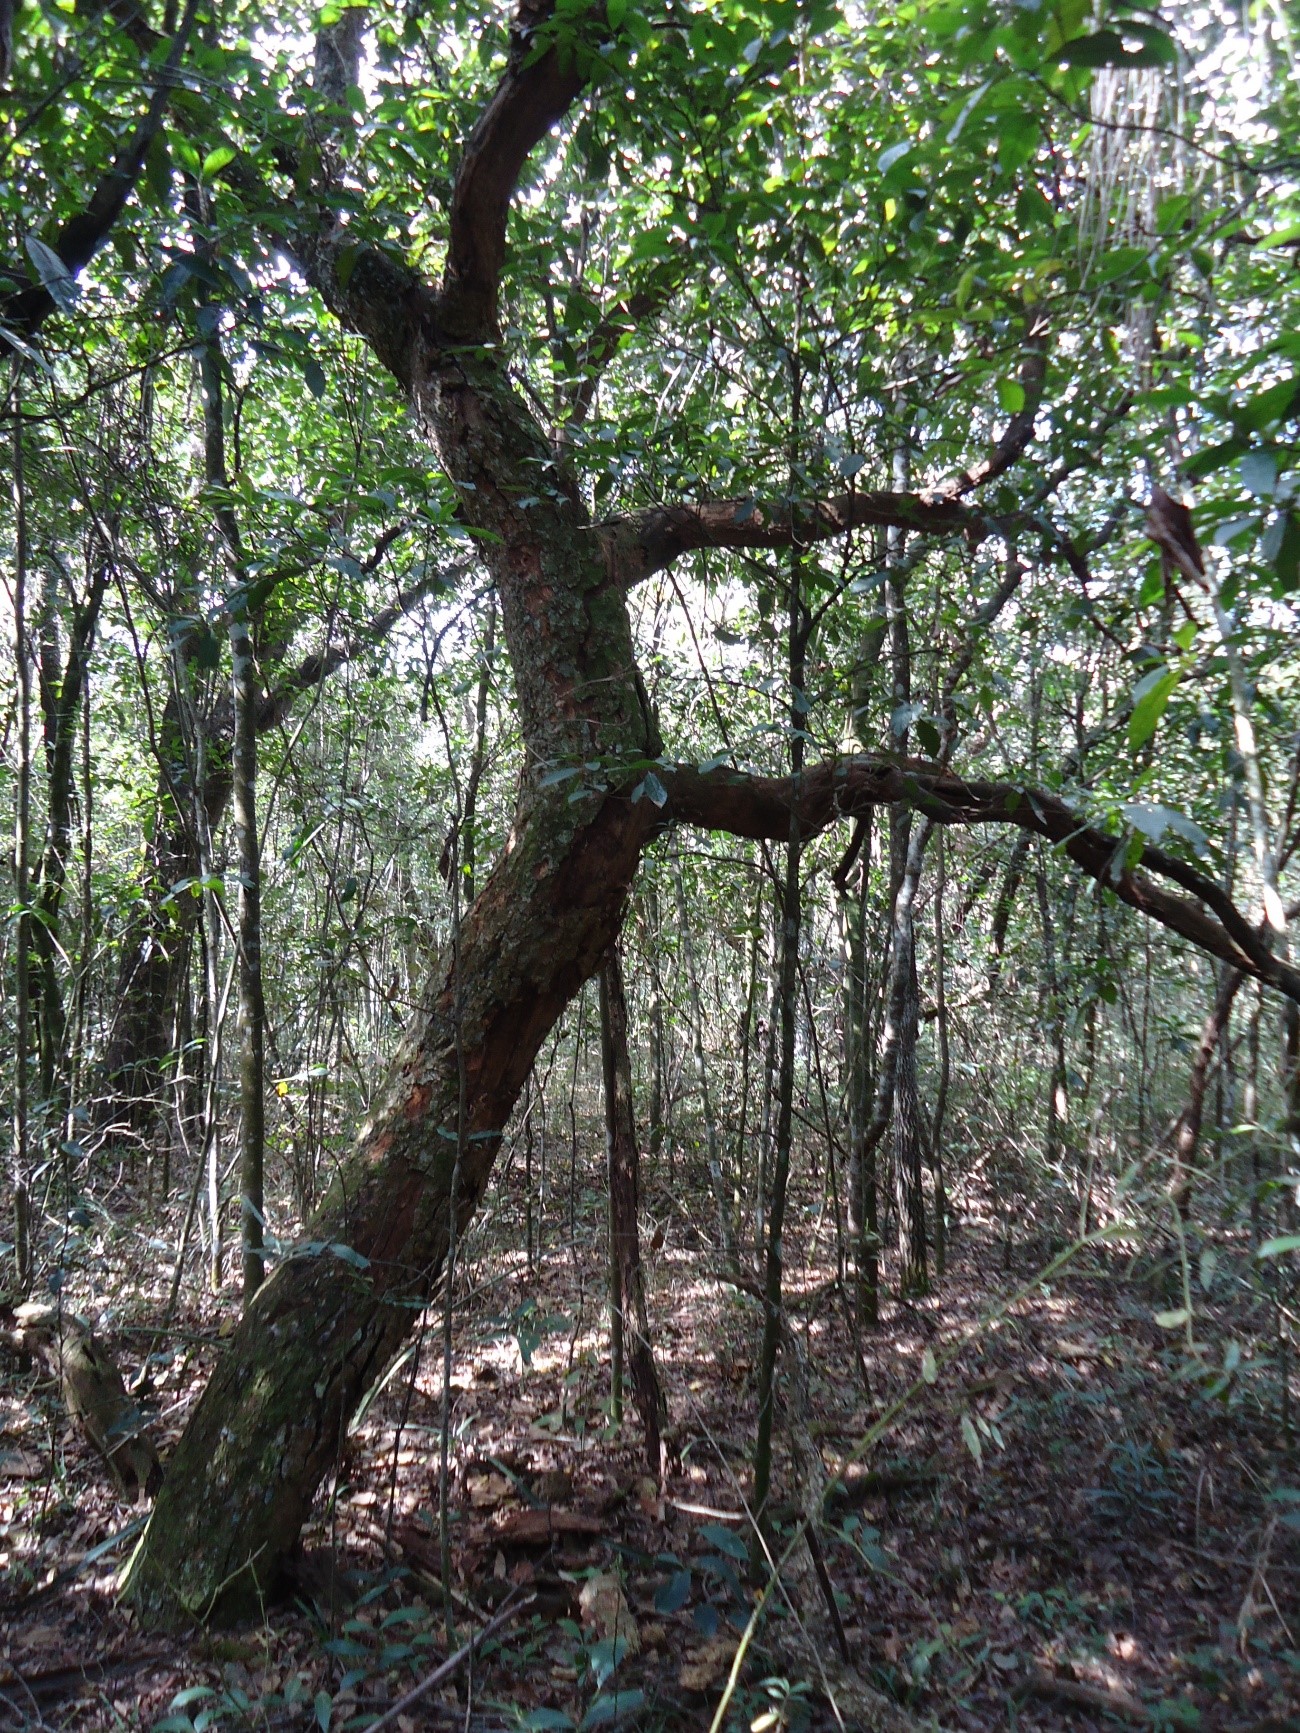 Without proper management, Cerrado becomes disfigured and less resilient to climate change